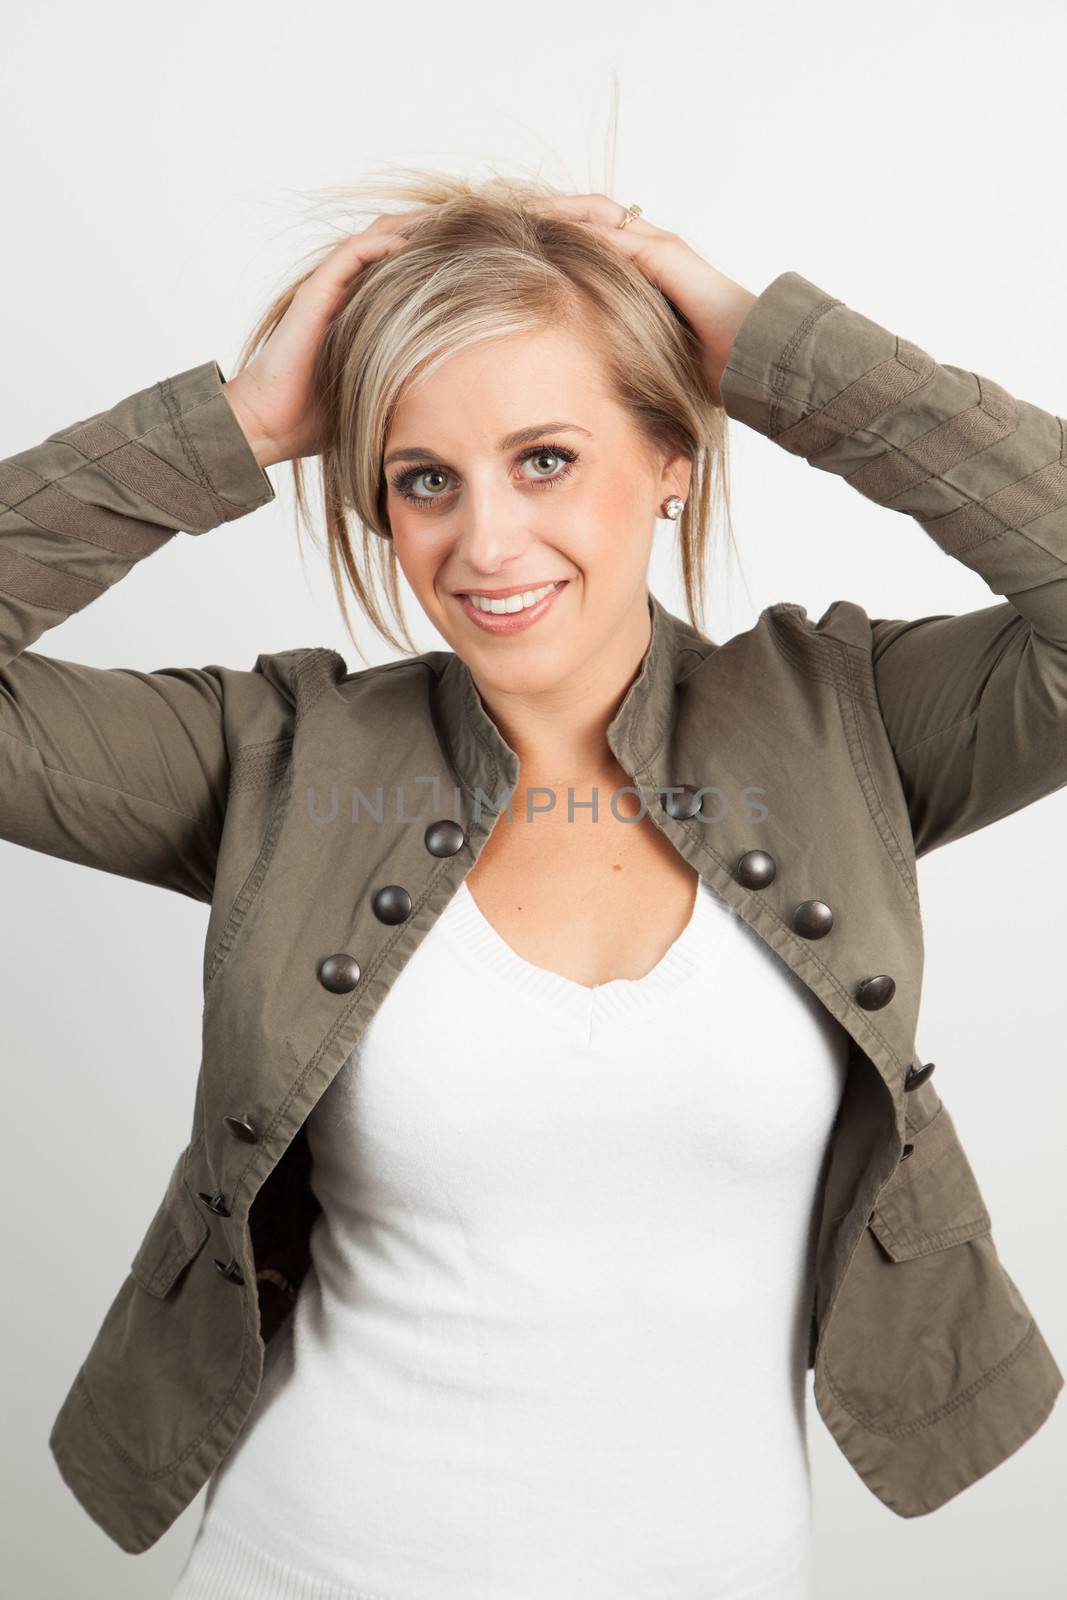 Portrait of a young blond woman smiling and playing in her hair by Izaphoto